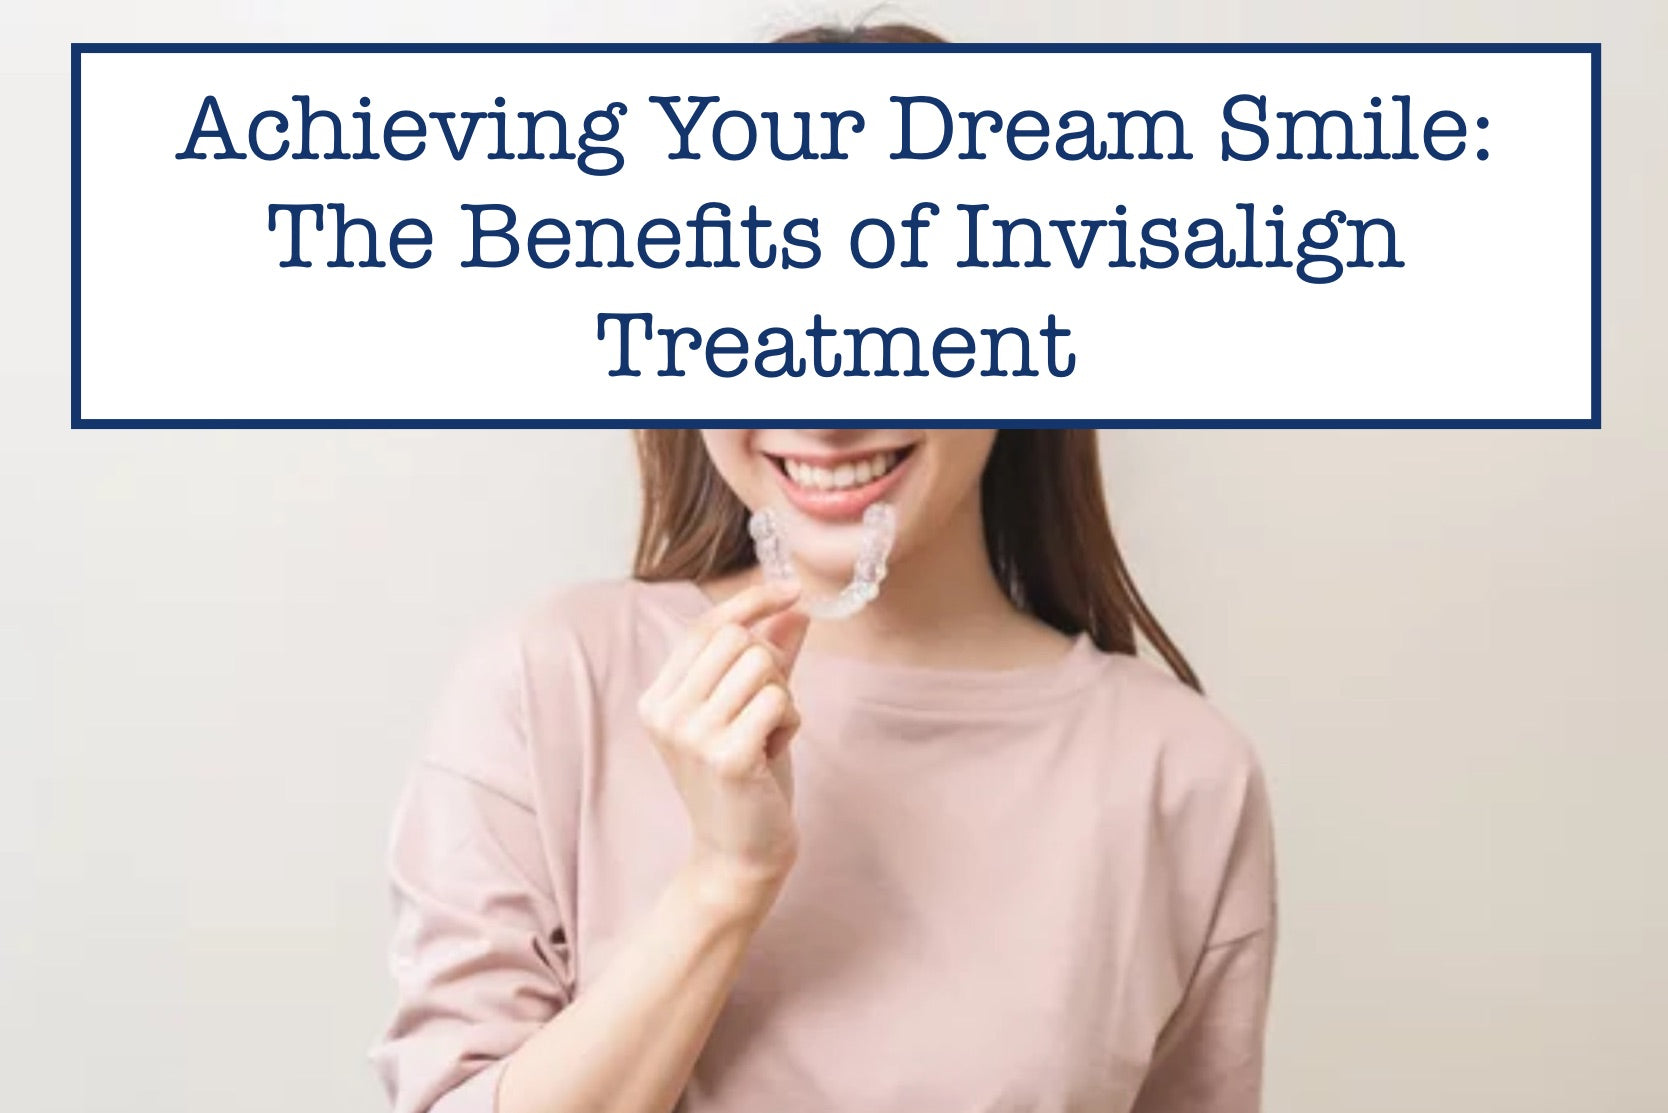 Achieving Your Dream Smile: The Benefits of Invisalign Treatment